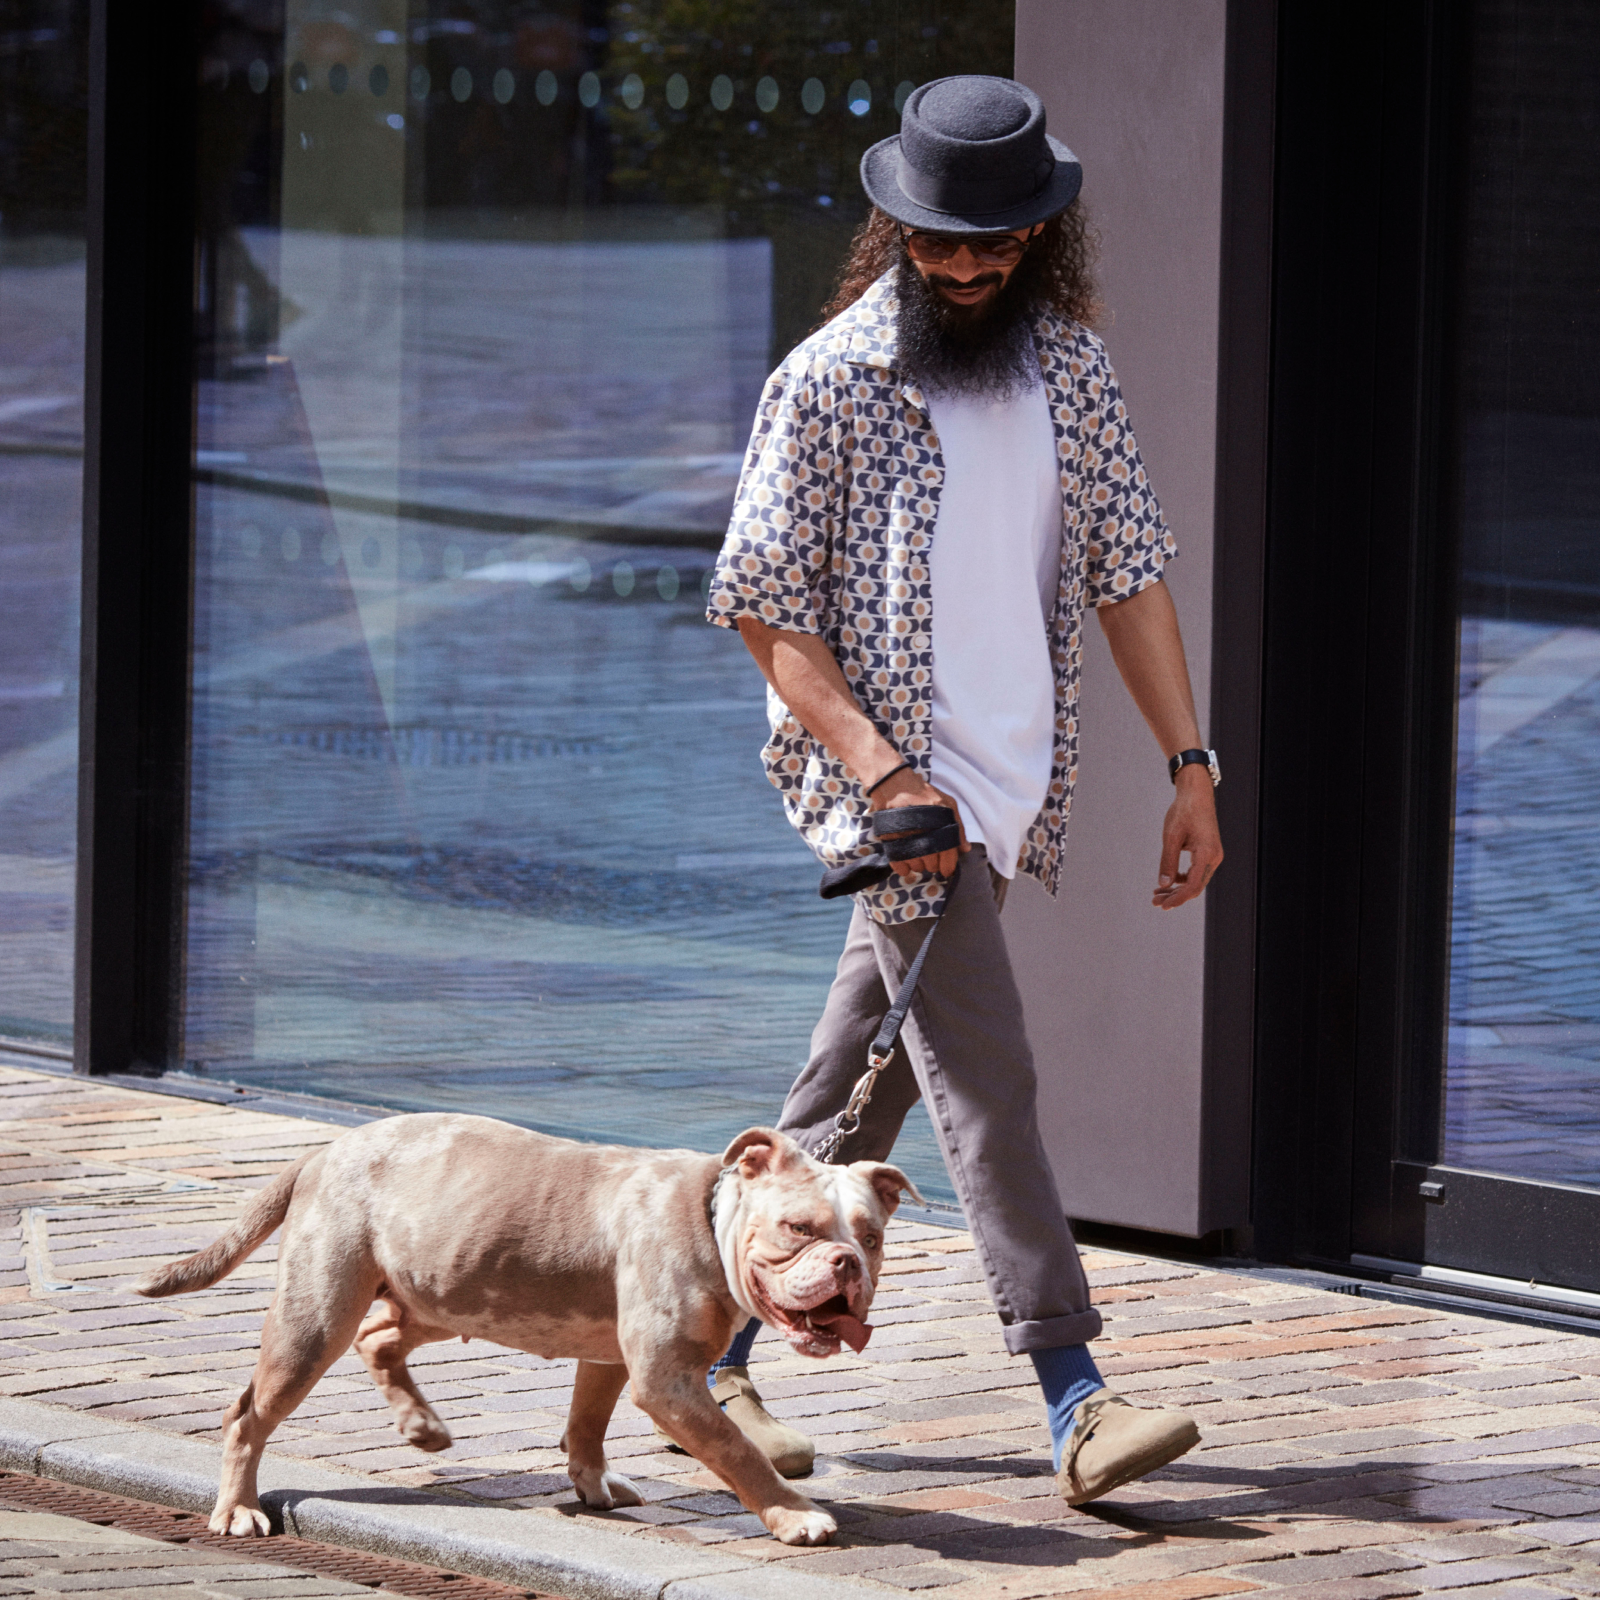 Man walking with a dog on a sunny day